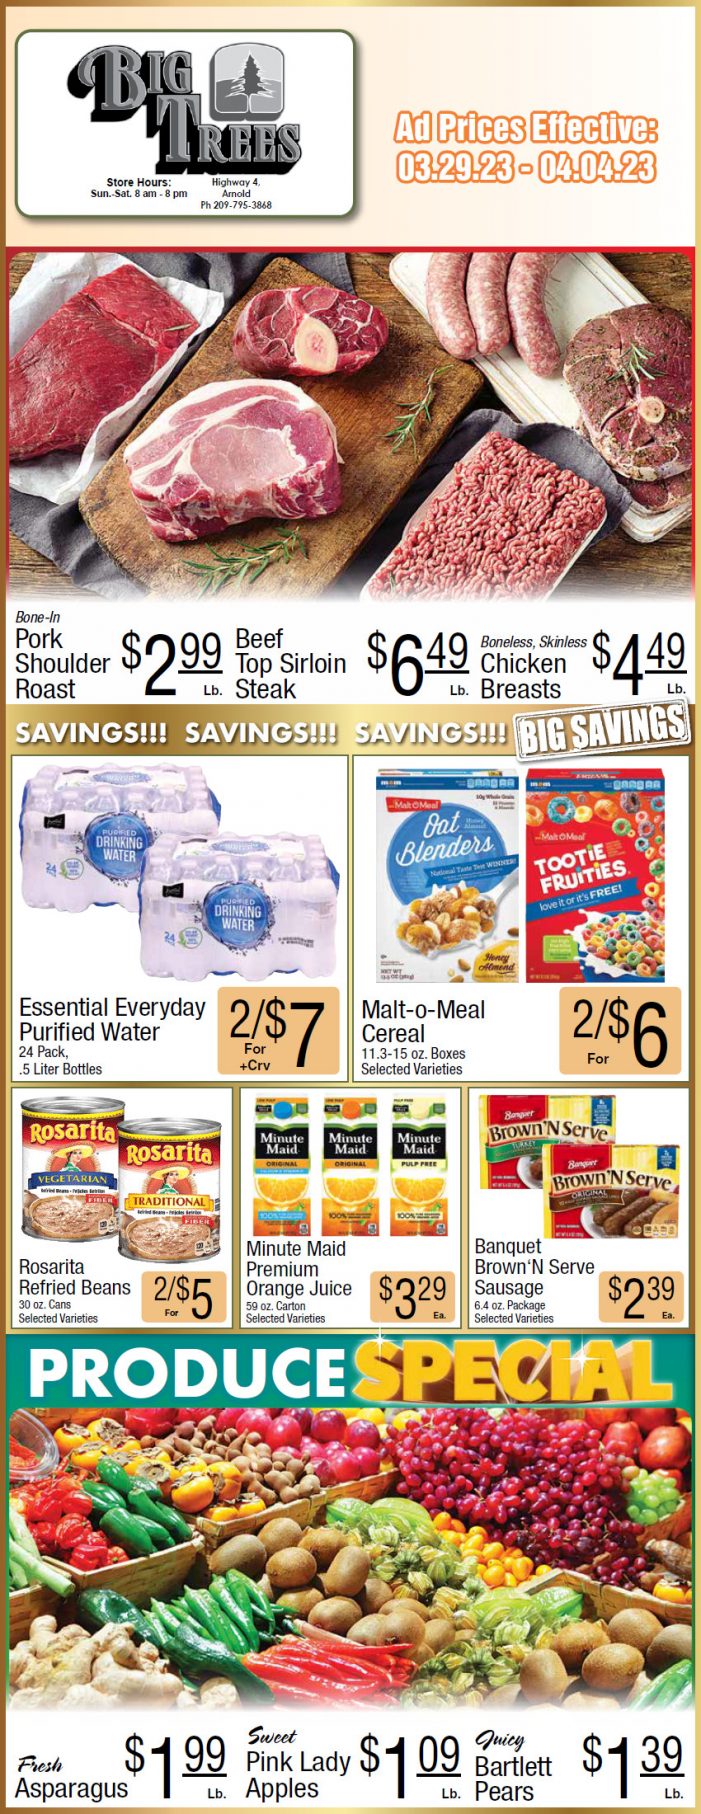 Big Trees Market Weekly Ad, Grocery, Produce, Meat & Deli Specials Through April 4th